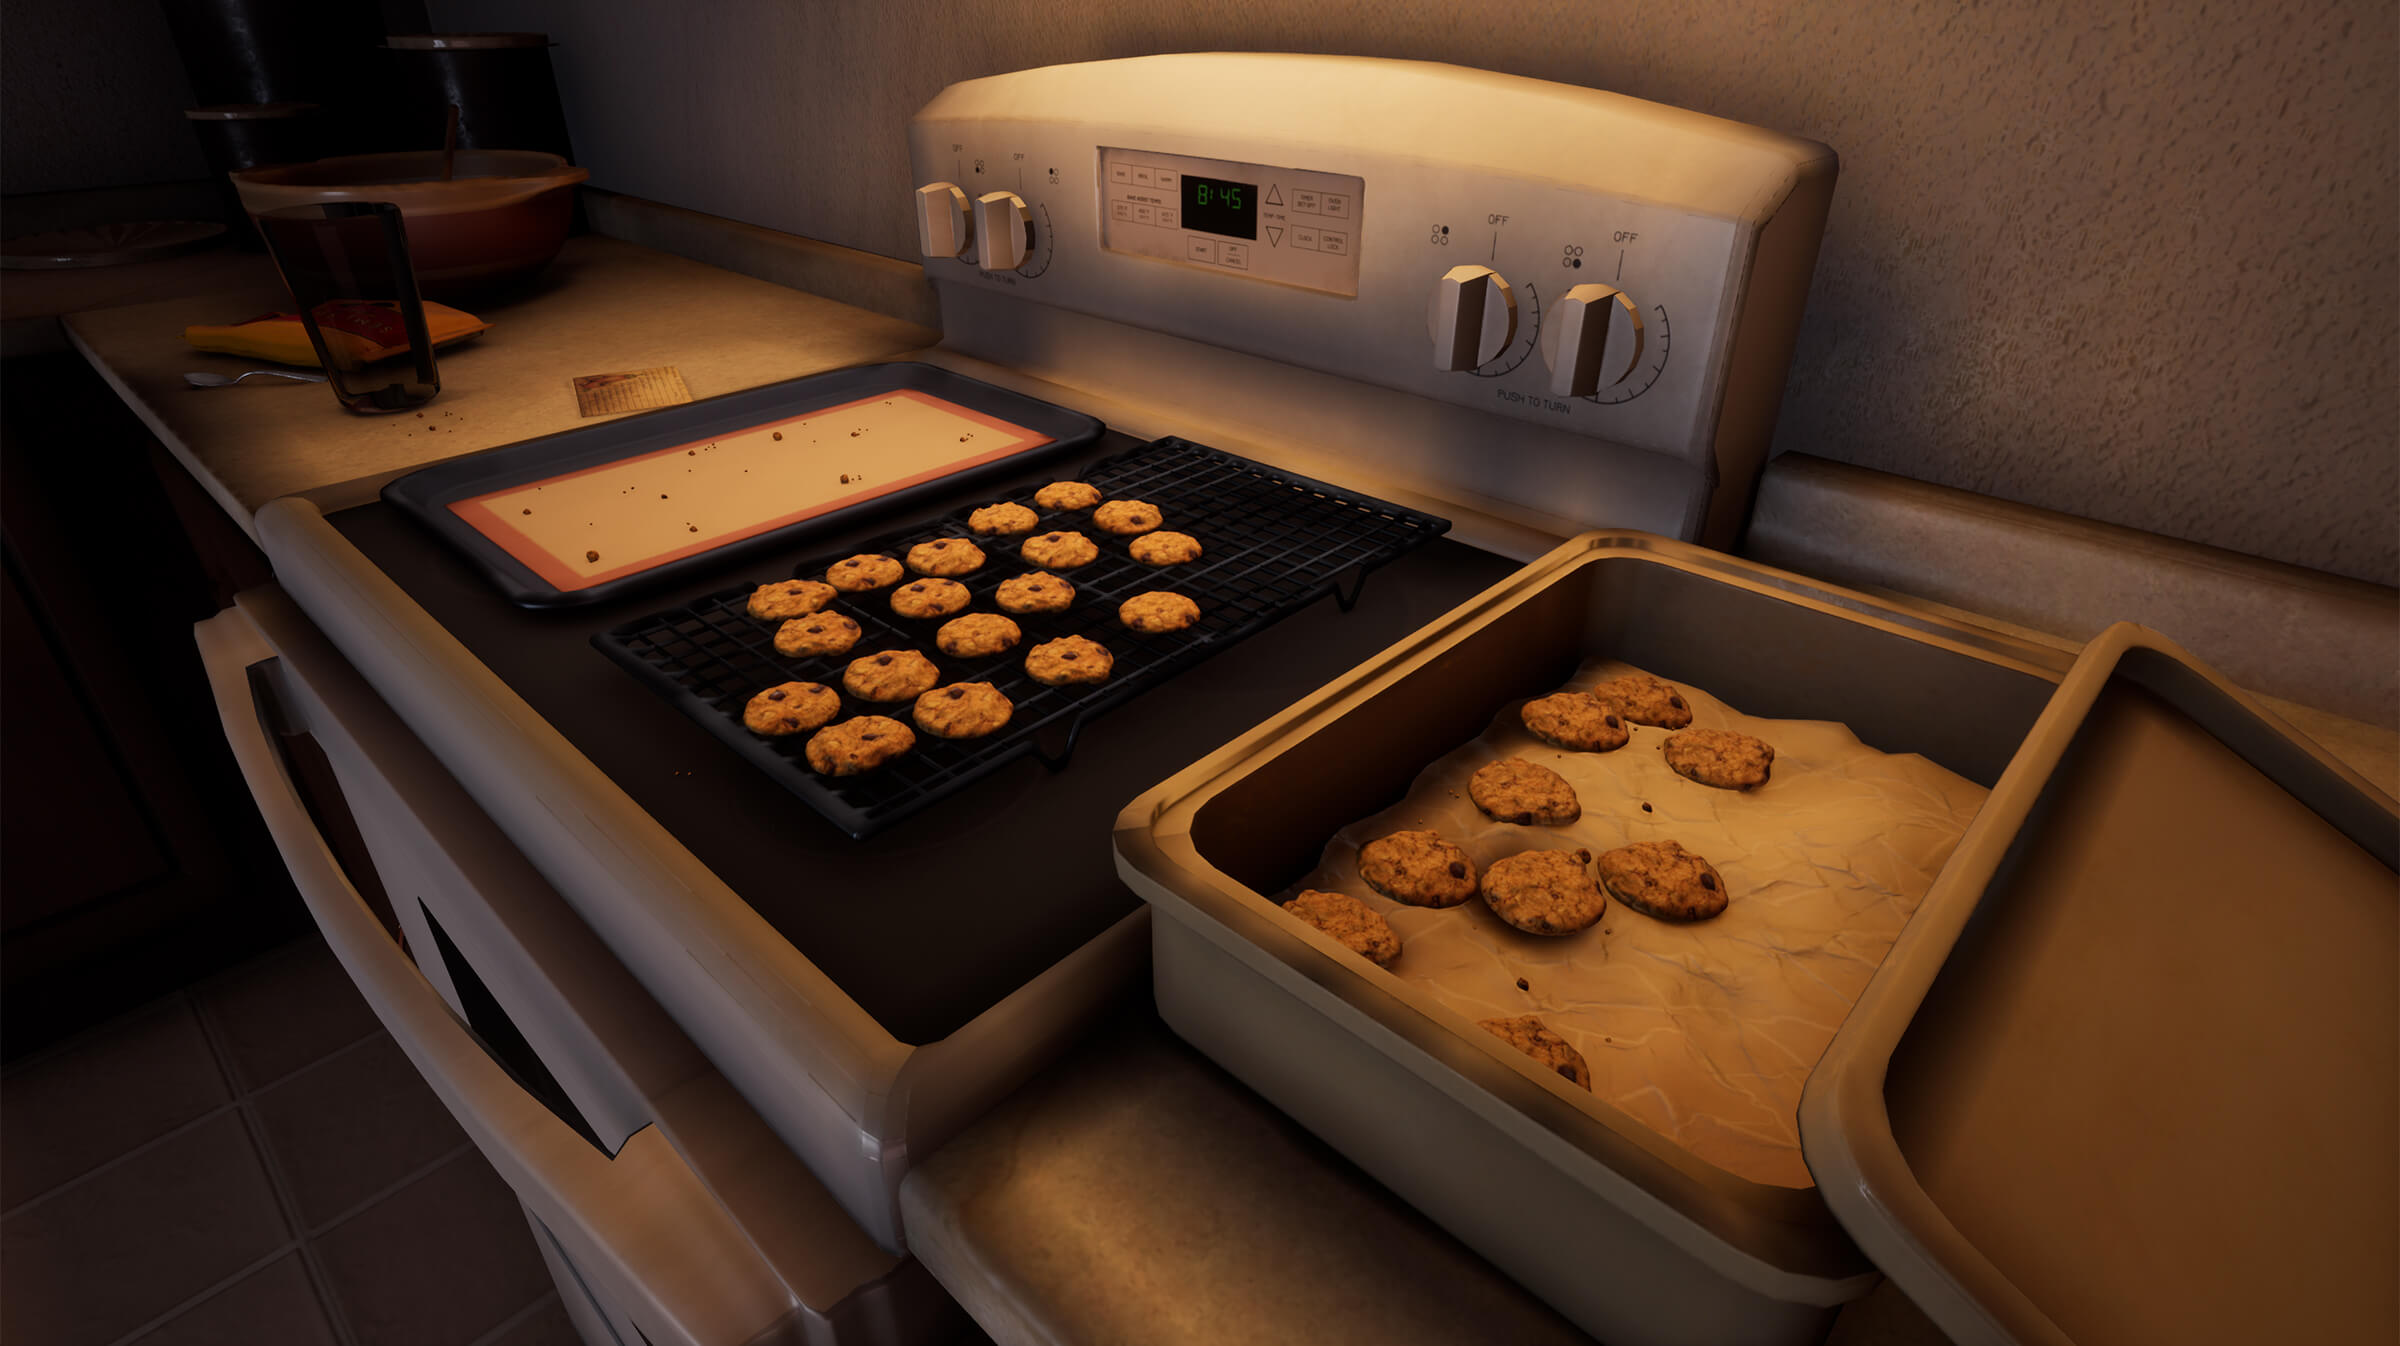 Chocolate chip cookies cooling on a rack on top of a stove